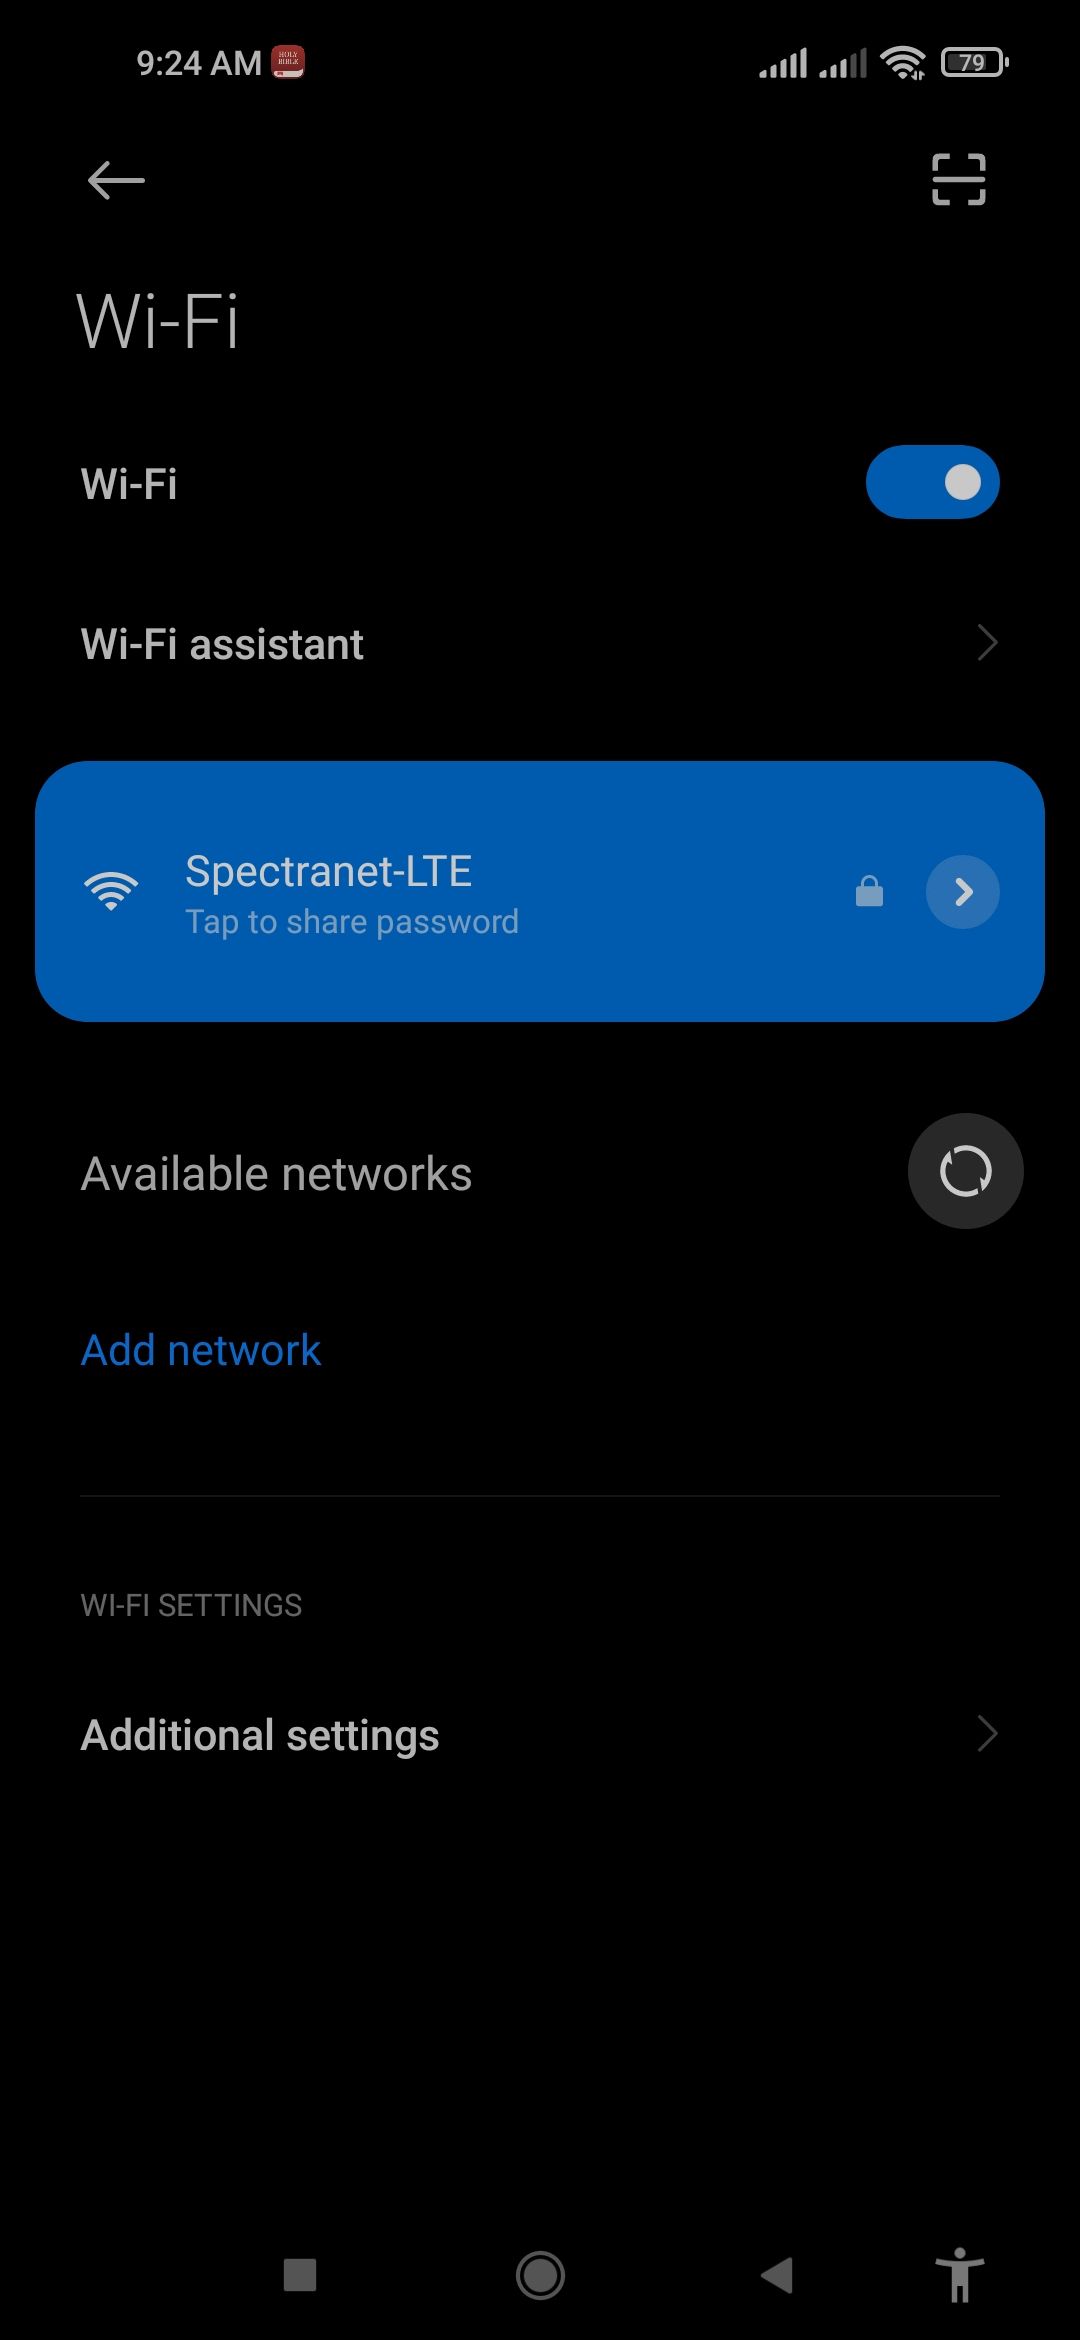 Tap on your network name